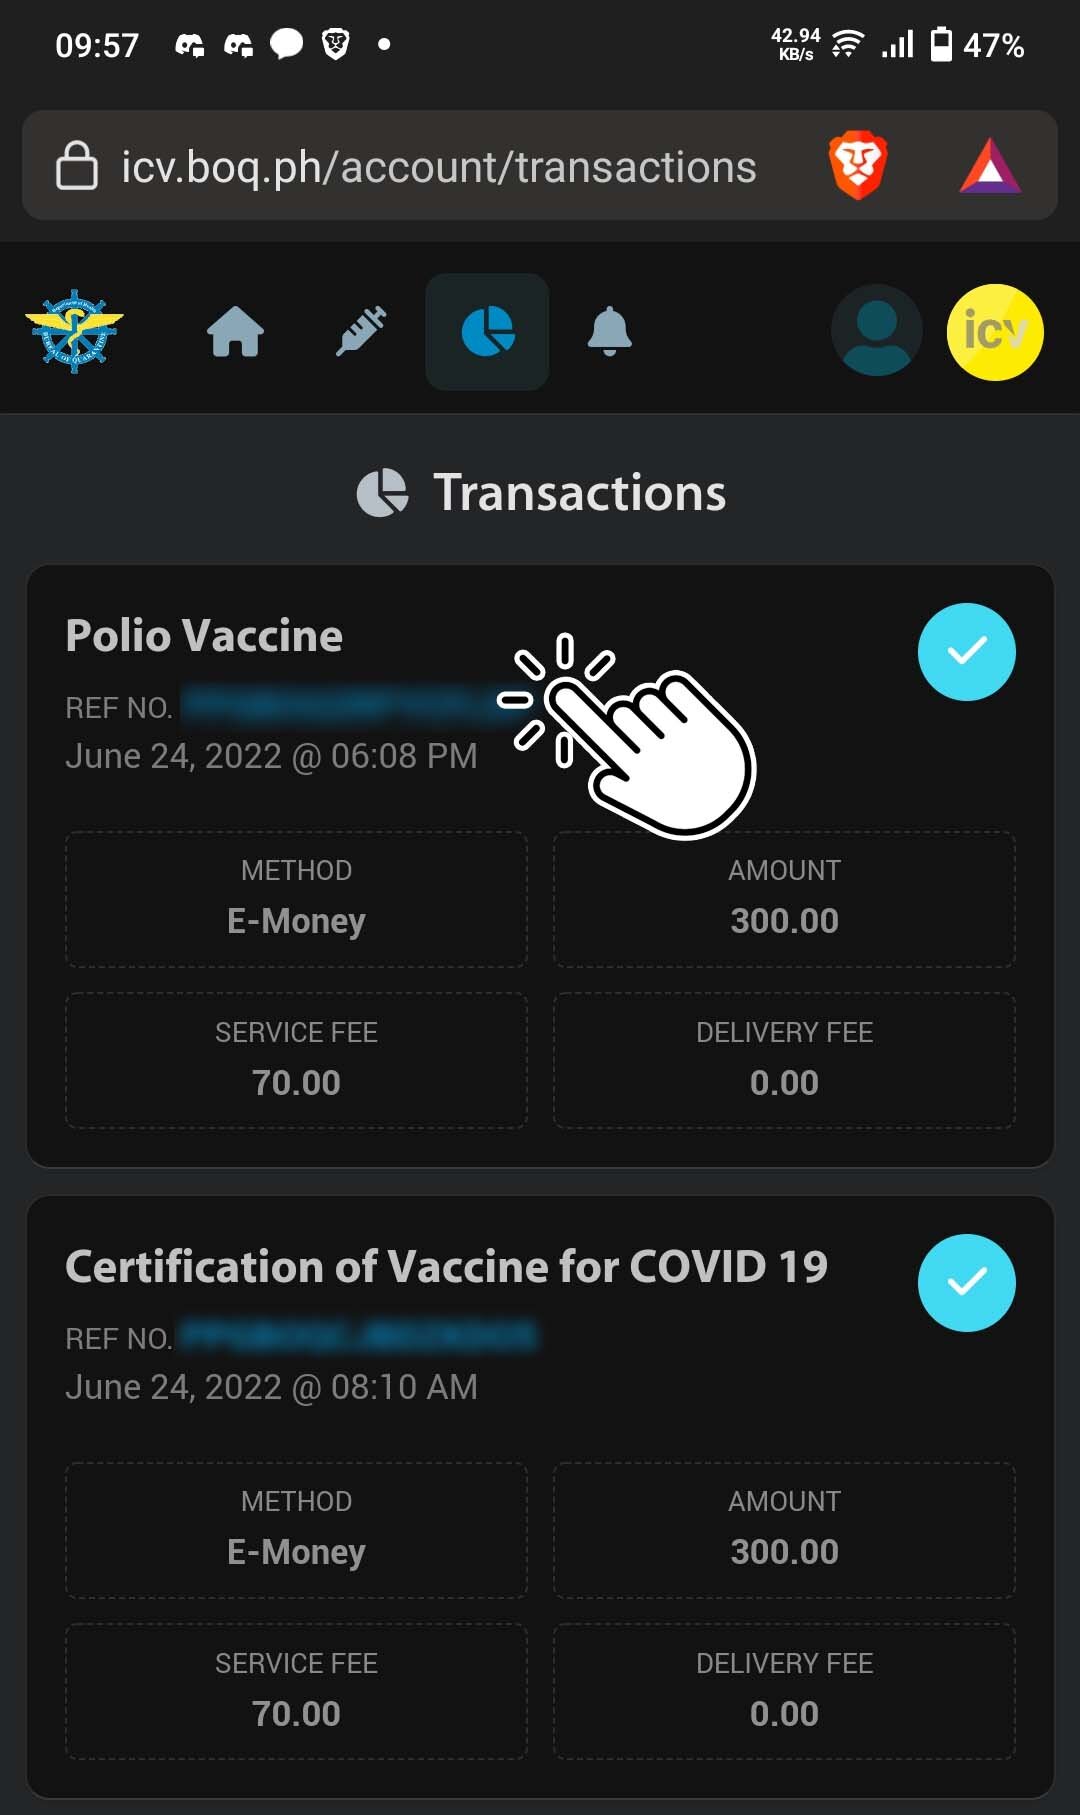 My Transactions Tab for my Polio Vaccine in my BoQ account.